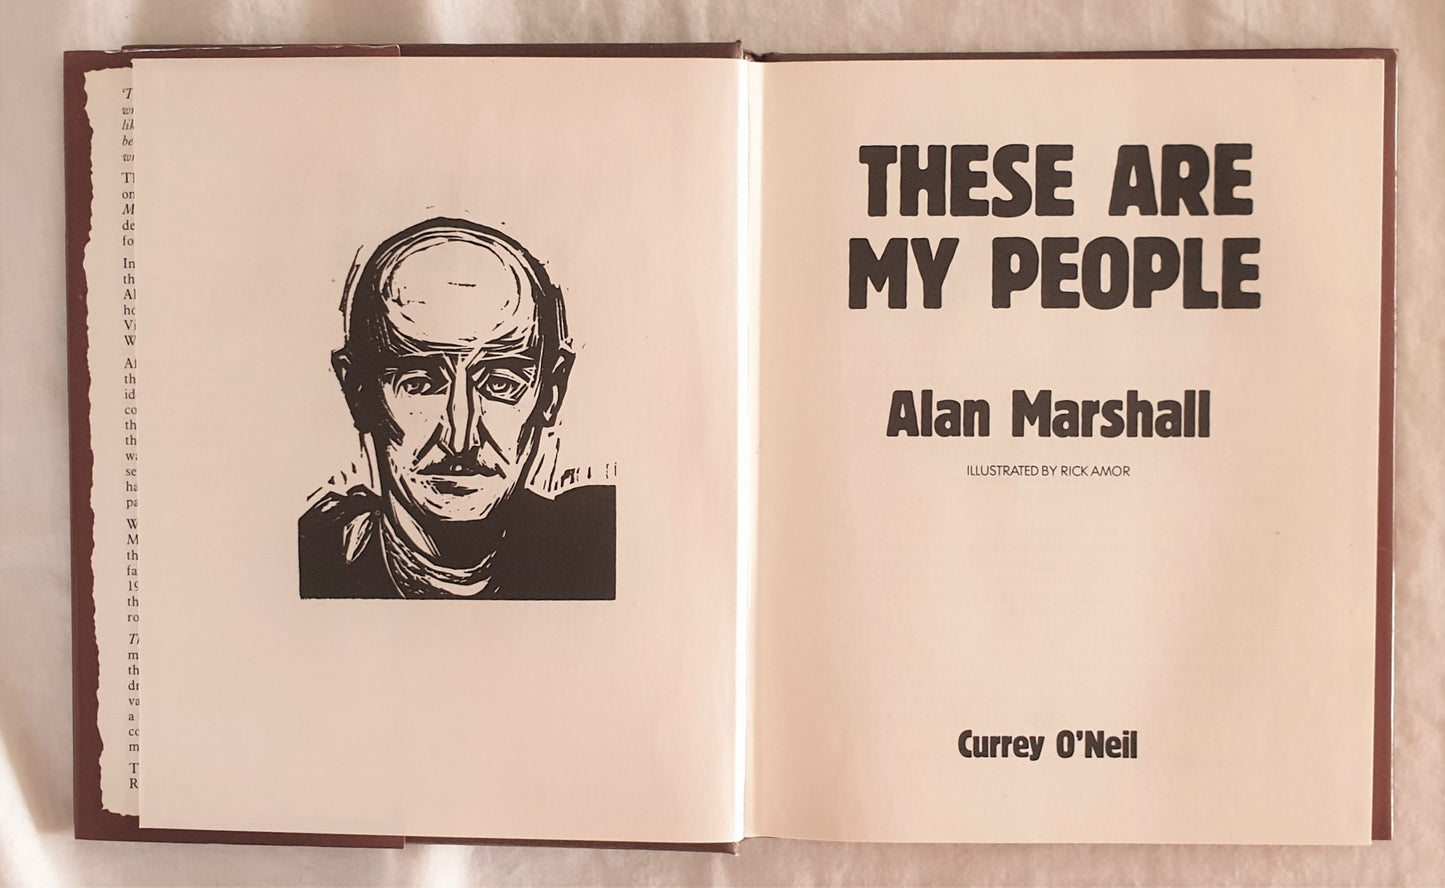 These Are My People by Alan Marshall